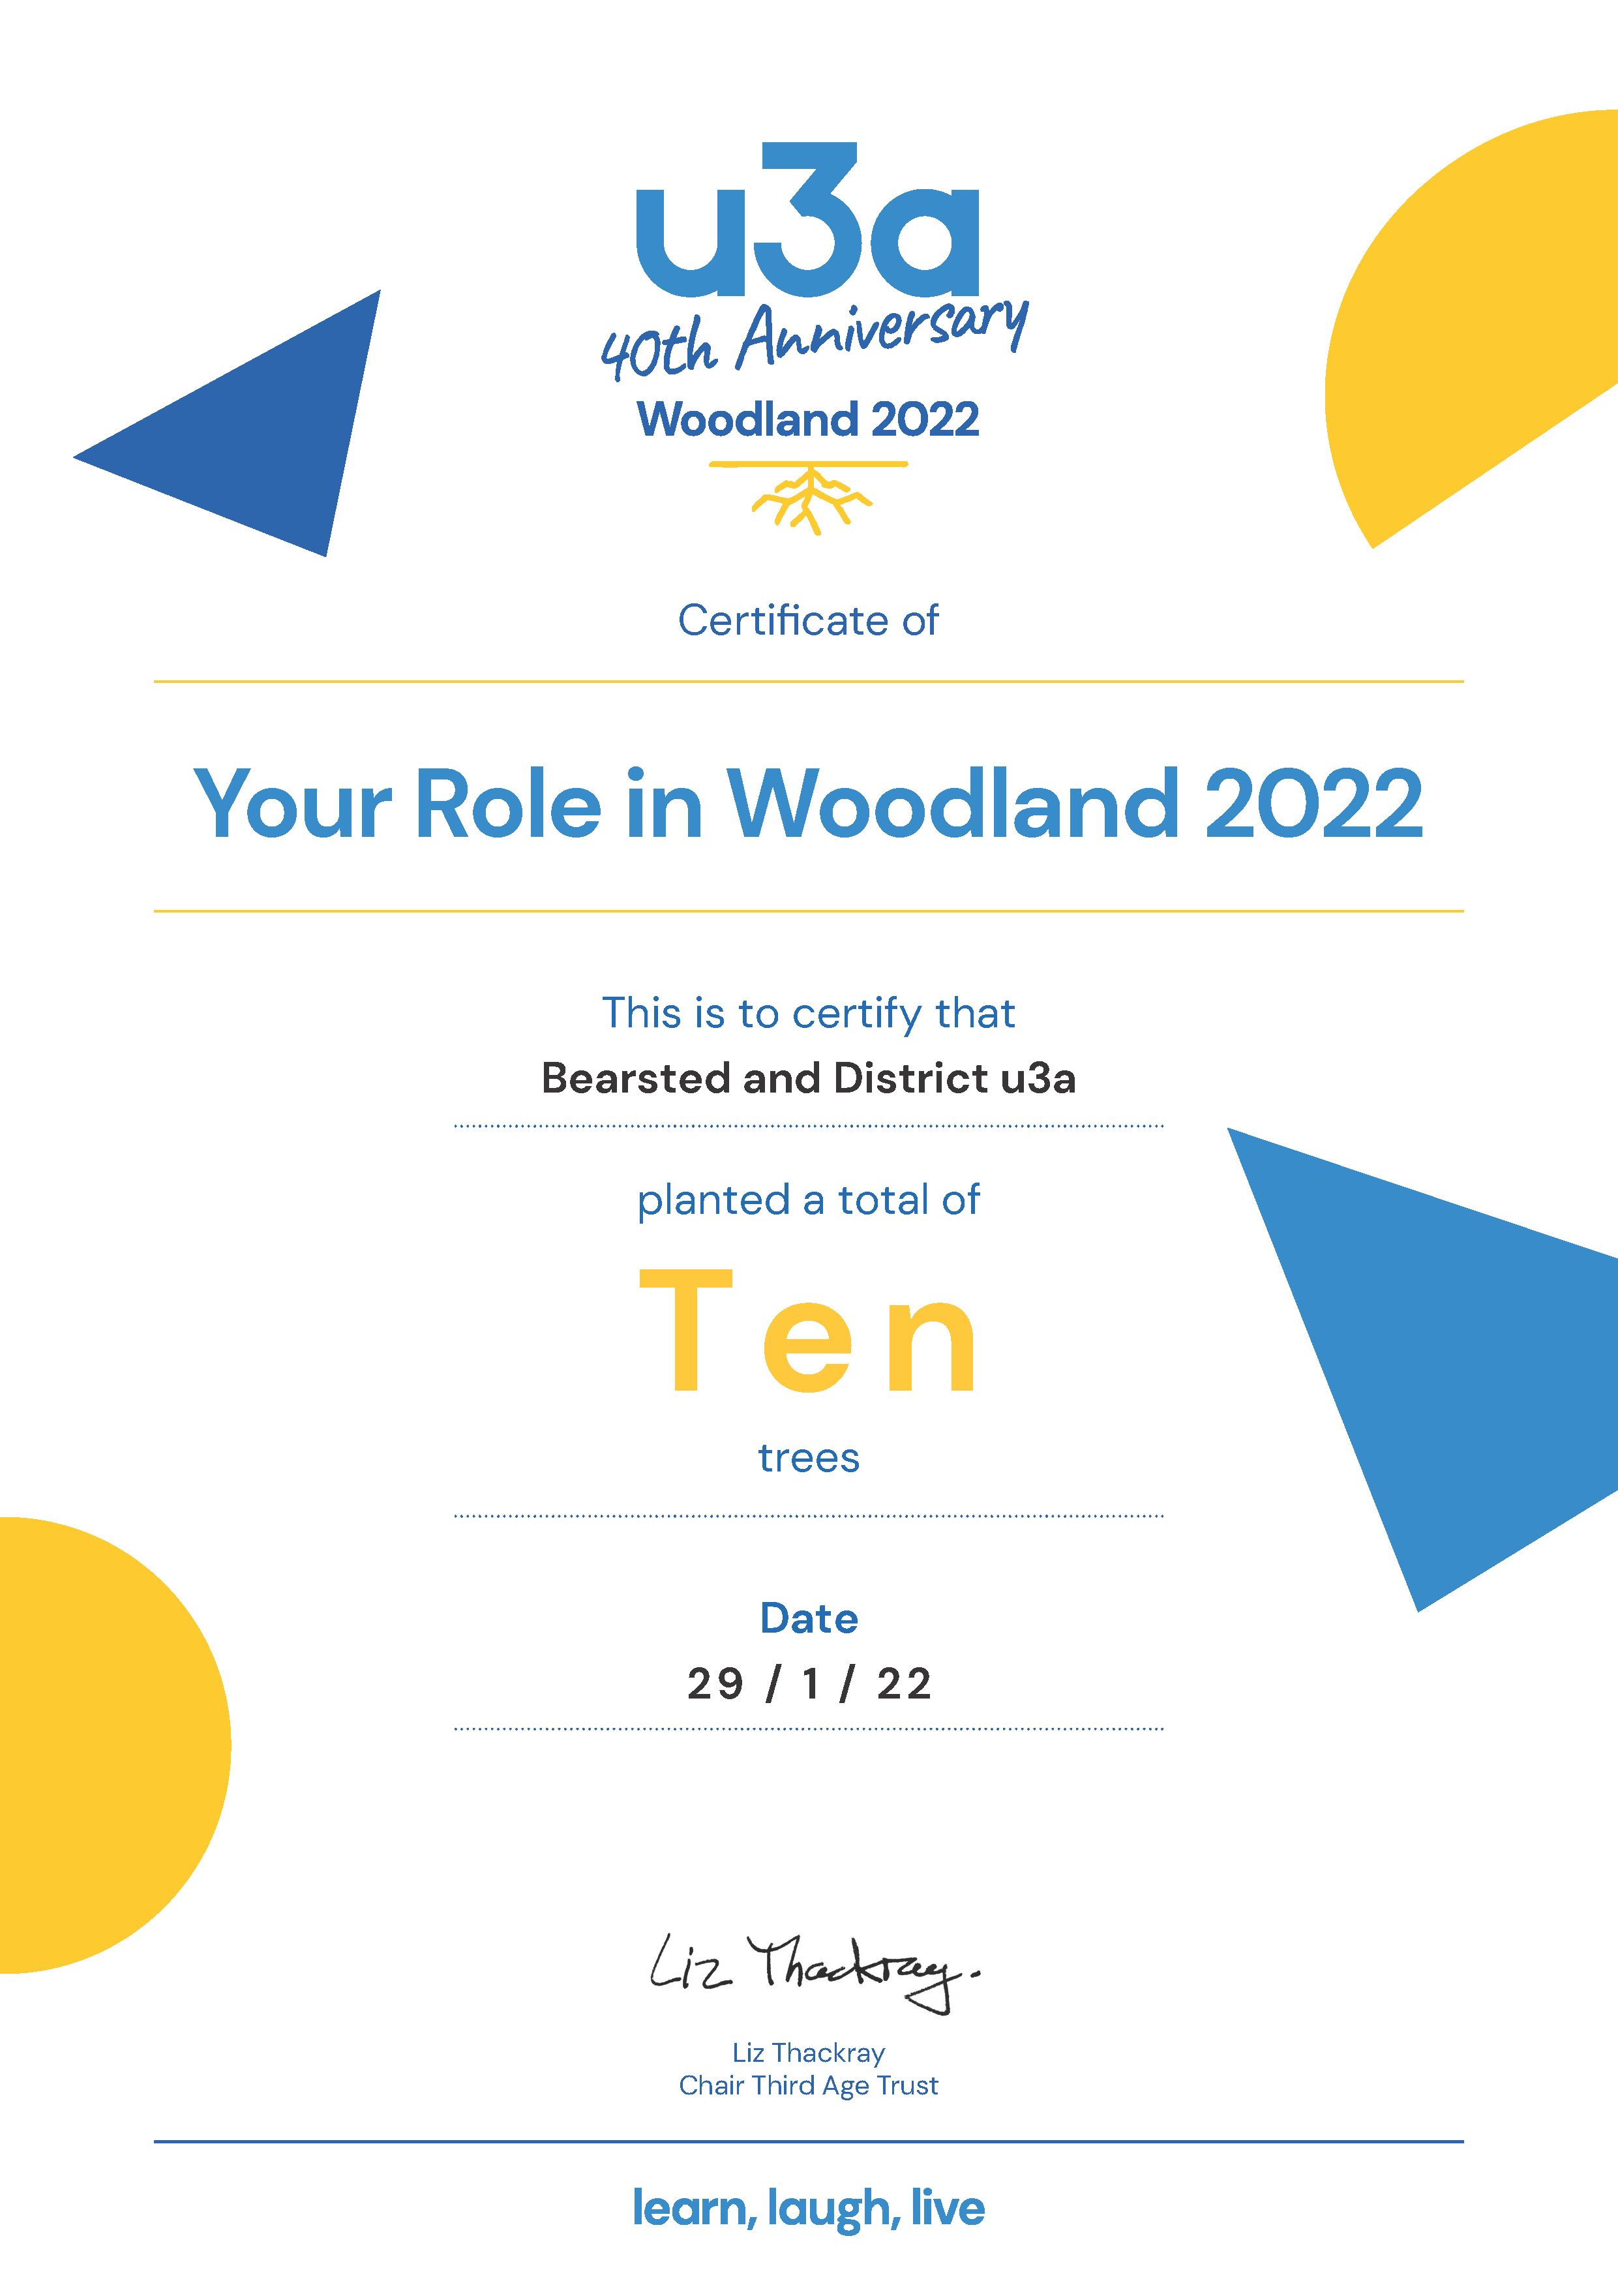 Our Role in Woodland 2022